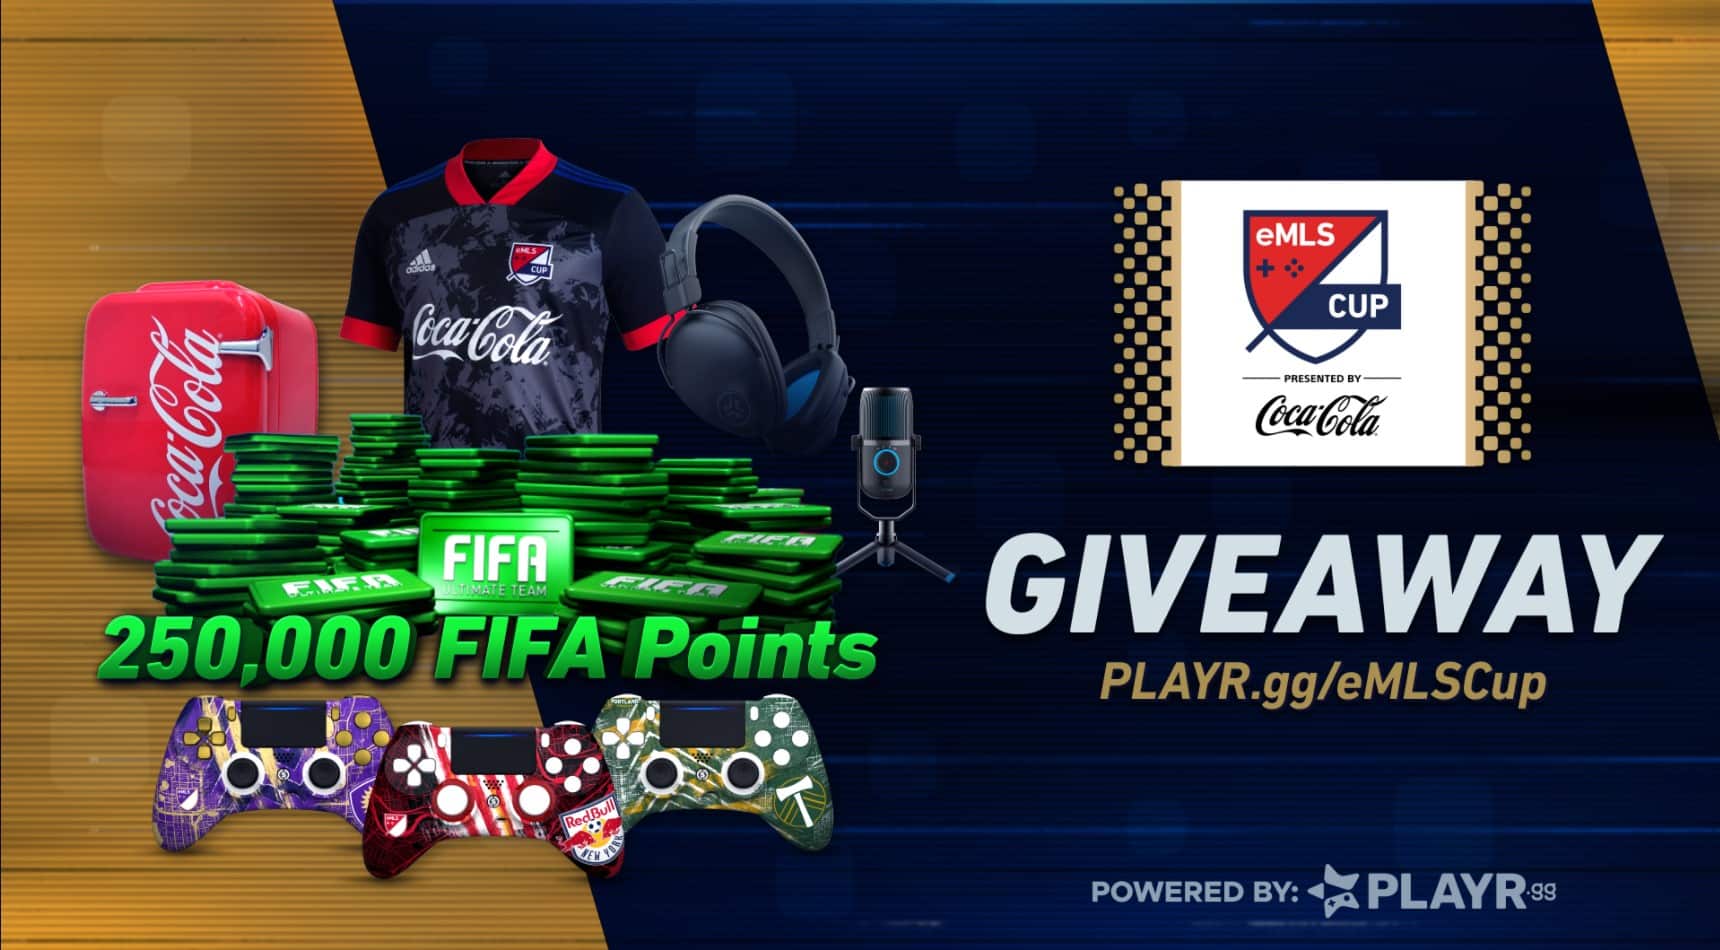 eMLS cup 2021 giveaway with fifa points and more